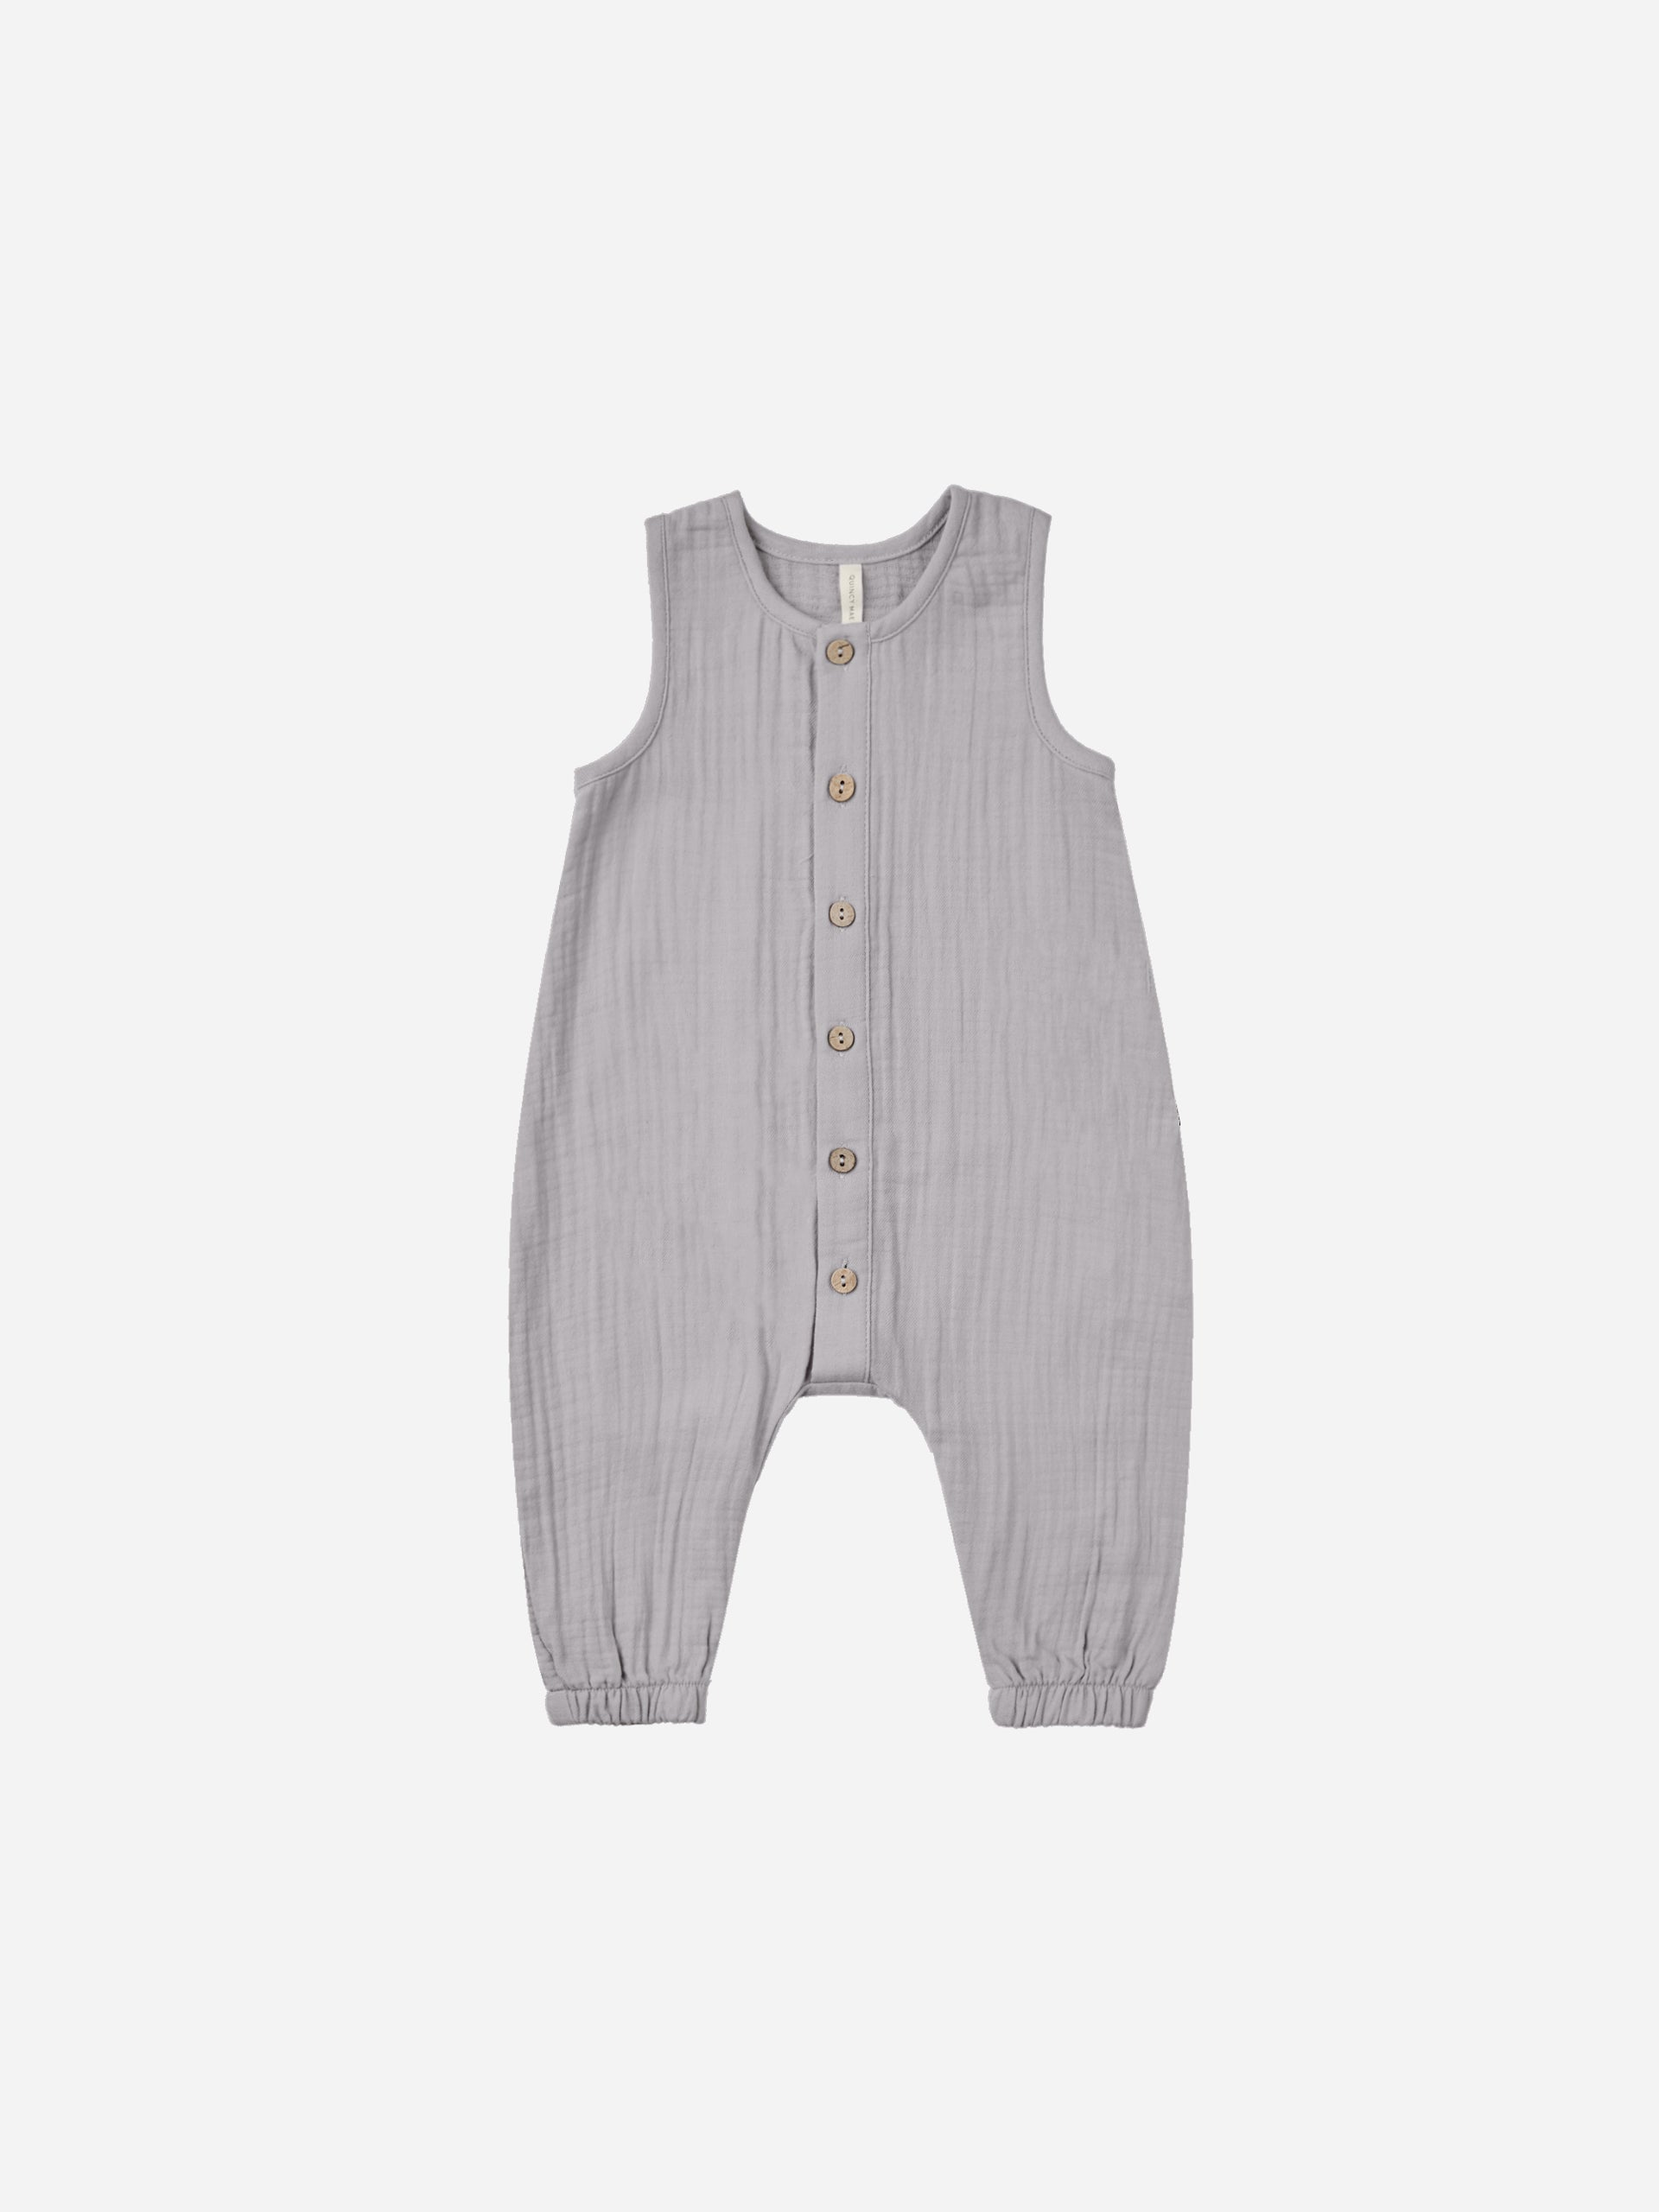 Woven Jumpsuit || Periwinkle - Rylee + Cru | Kids Clothes | Trendy Baby Clothes | Modern Infant Outfits |